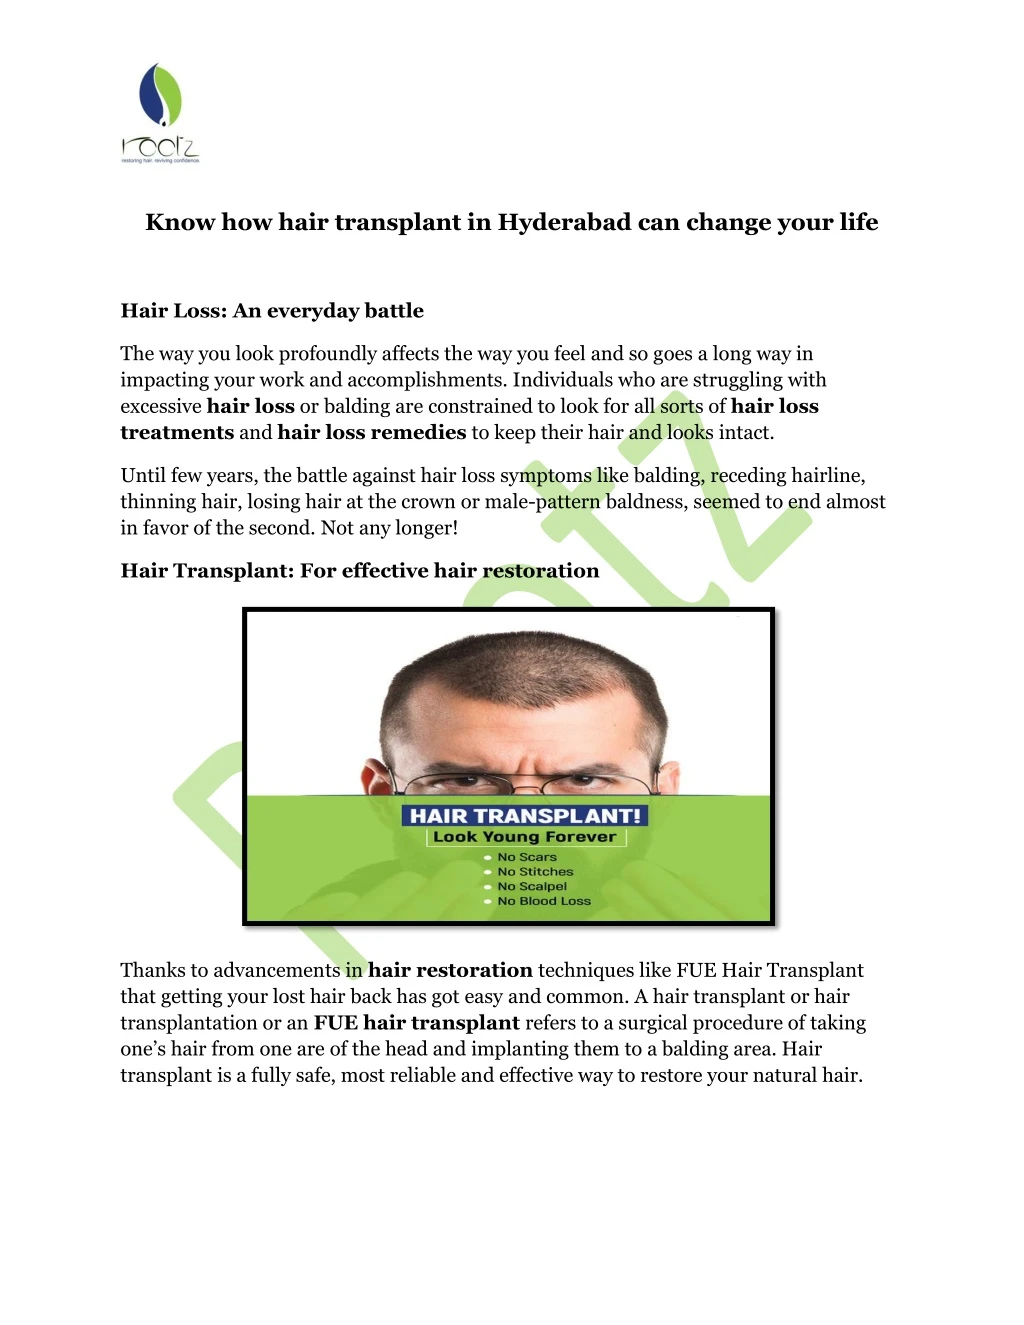 know how hair transplant in hyderabad can change